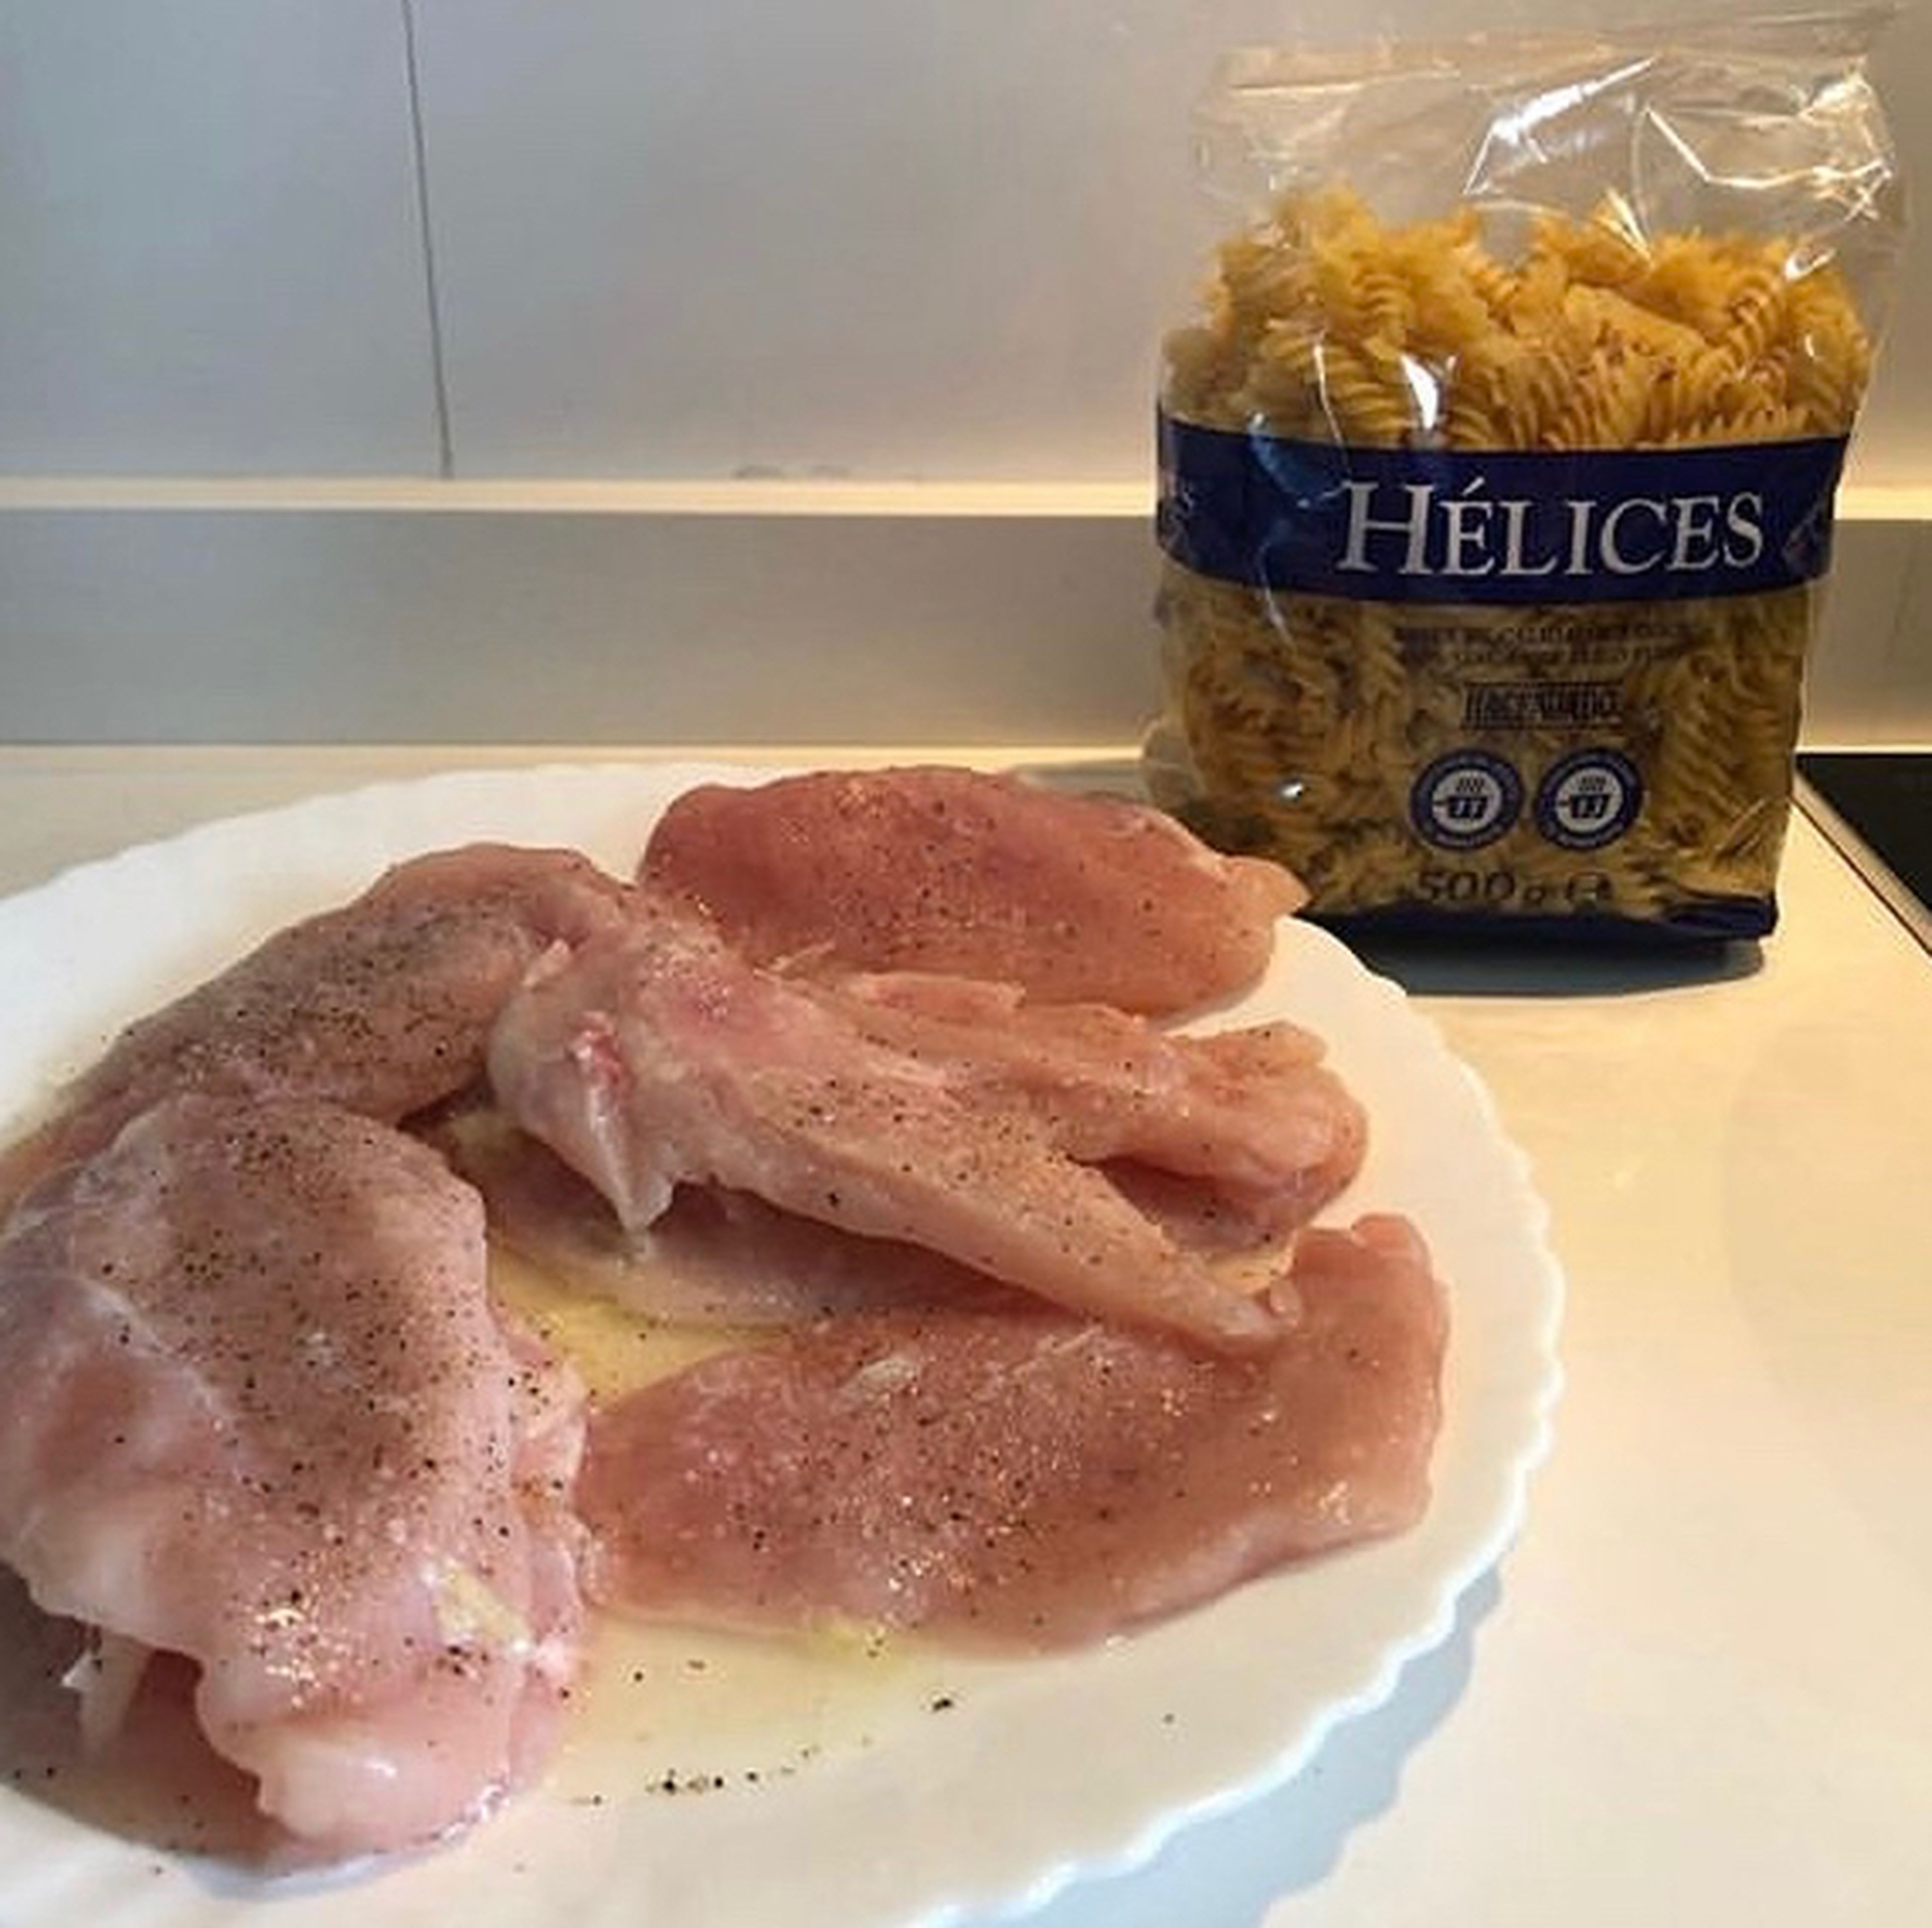 First thing first we are going to marinate the chicken by grabbing a plate and setting the thin chicken breast slices. Then add some lemon juice from the two full lemons. Season the chicken with salt and pepper and let it sit for 15 minutes.